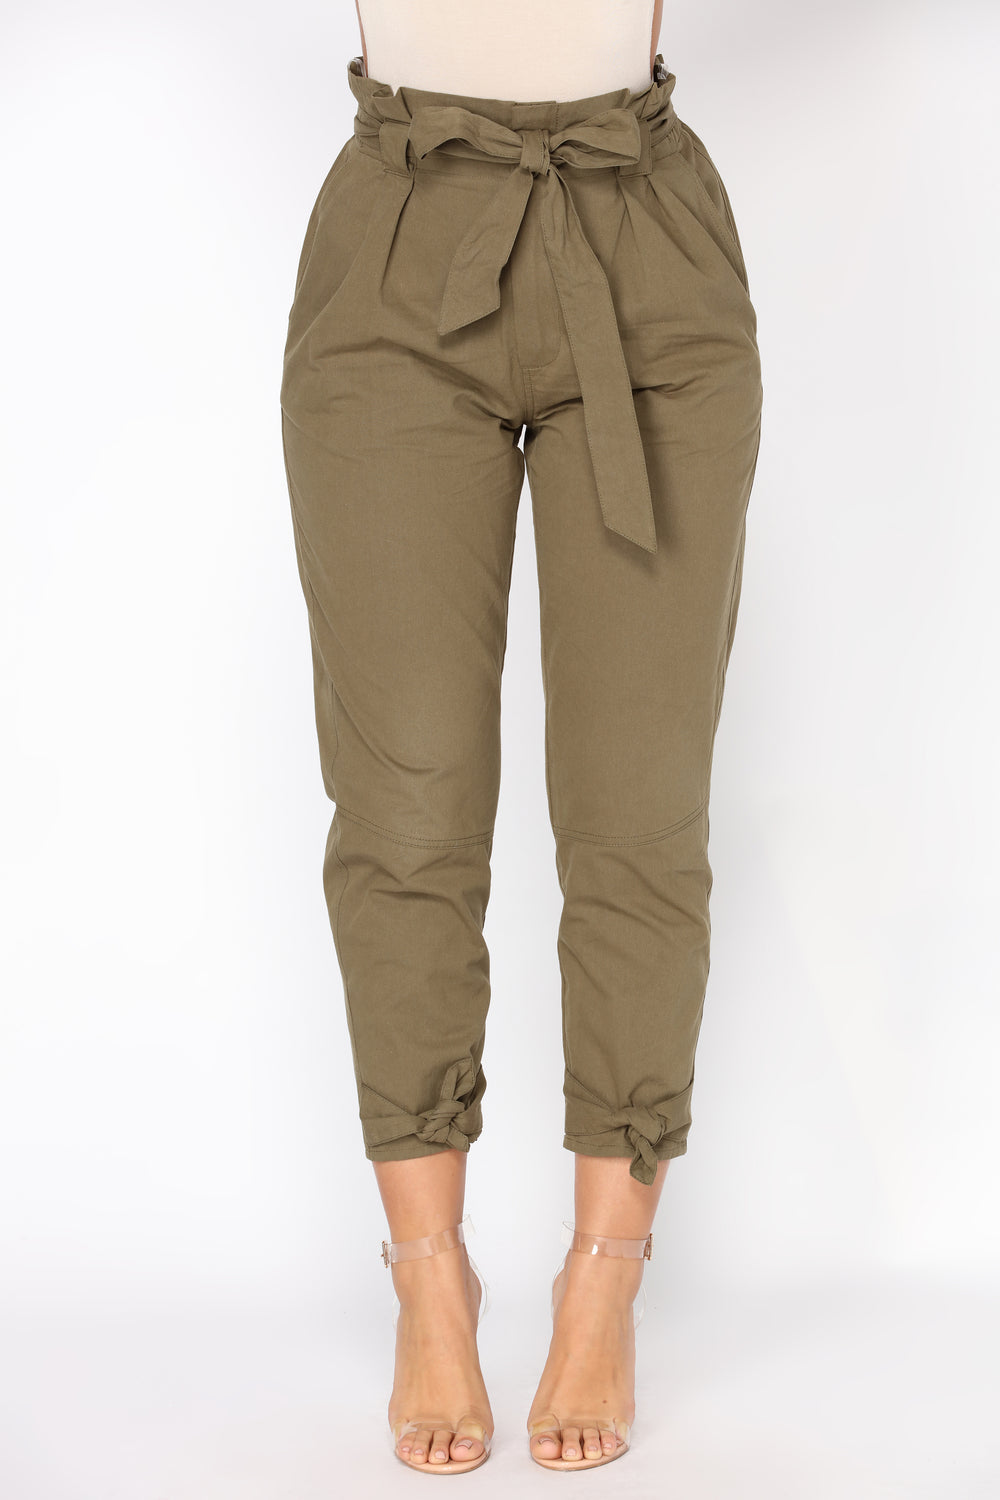 Going On An Adventure Cargo Pants - Olive